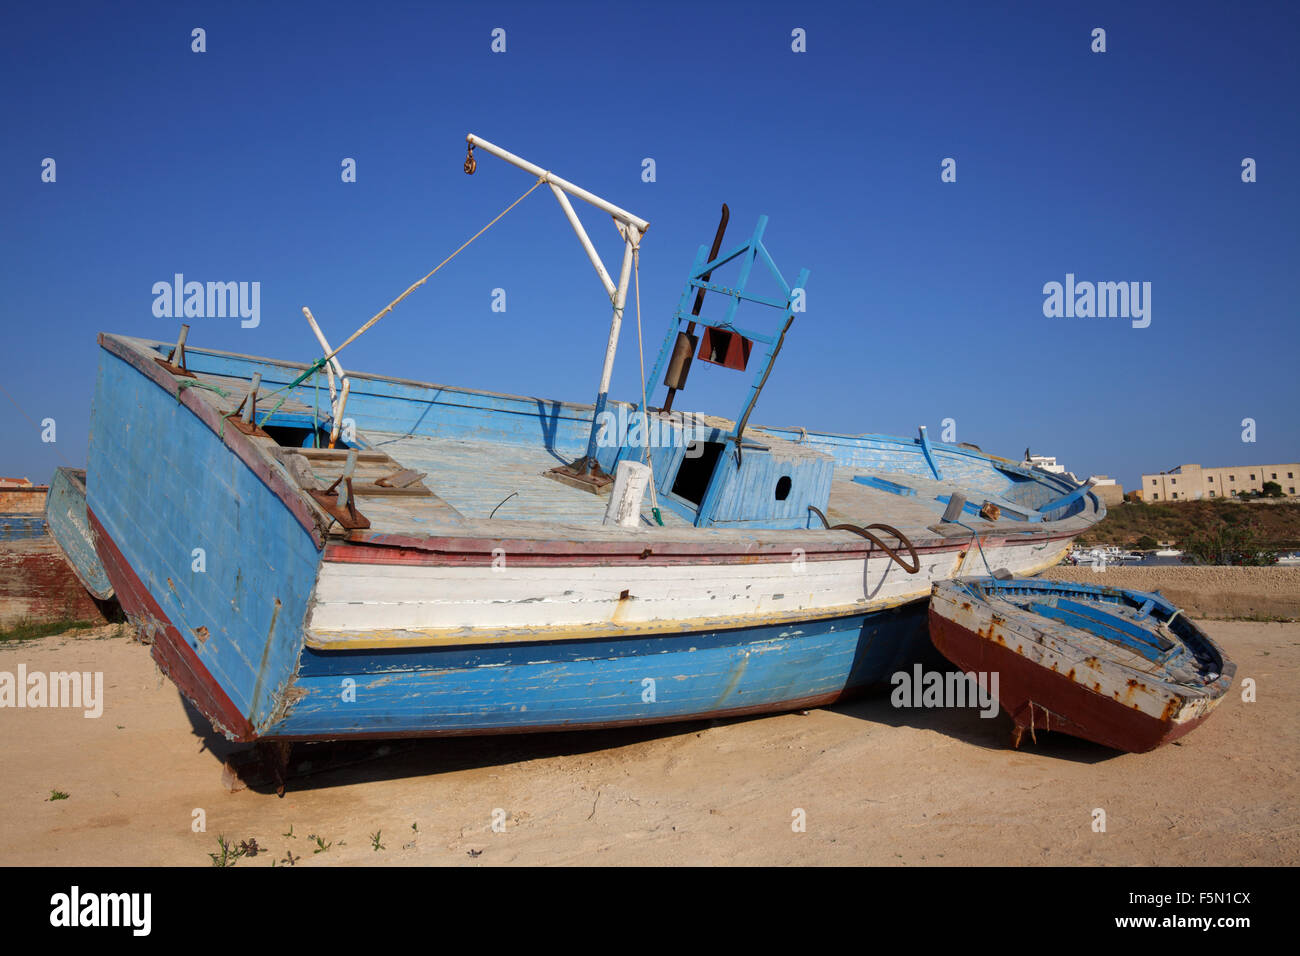 Shipwrecks used by clandestine immigrants to cross the Mediterranean sea, Lampedusa, Italy Stock Photo